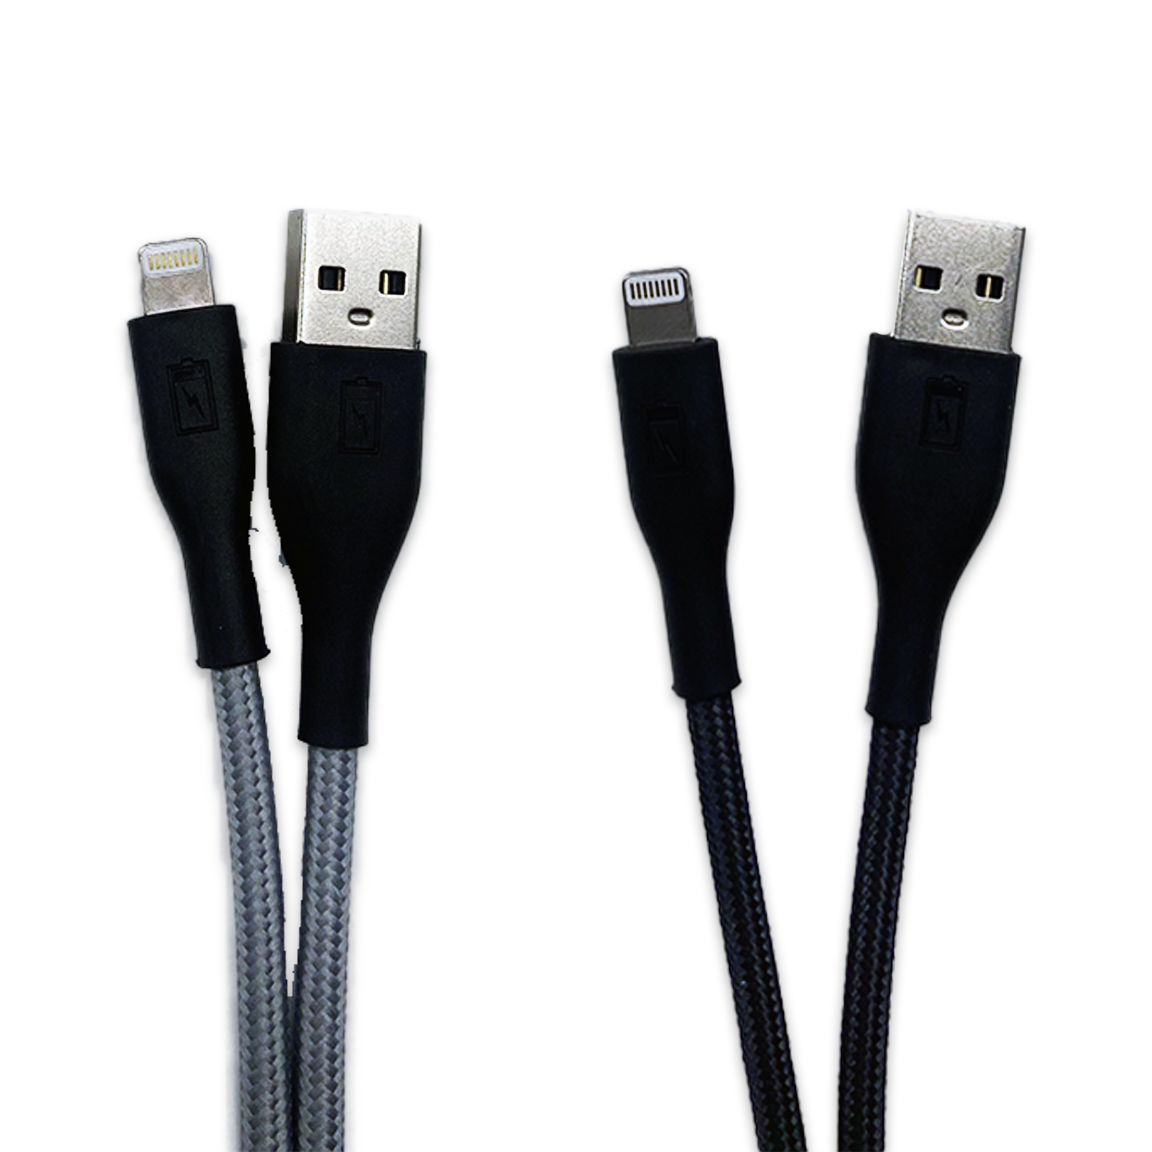 WHOLESALE 10FT LIGHTNING CABLE 8 PIECES PER PACK 24664